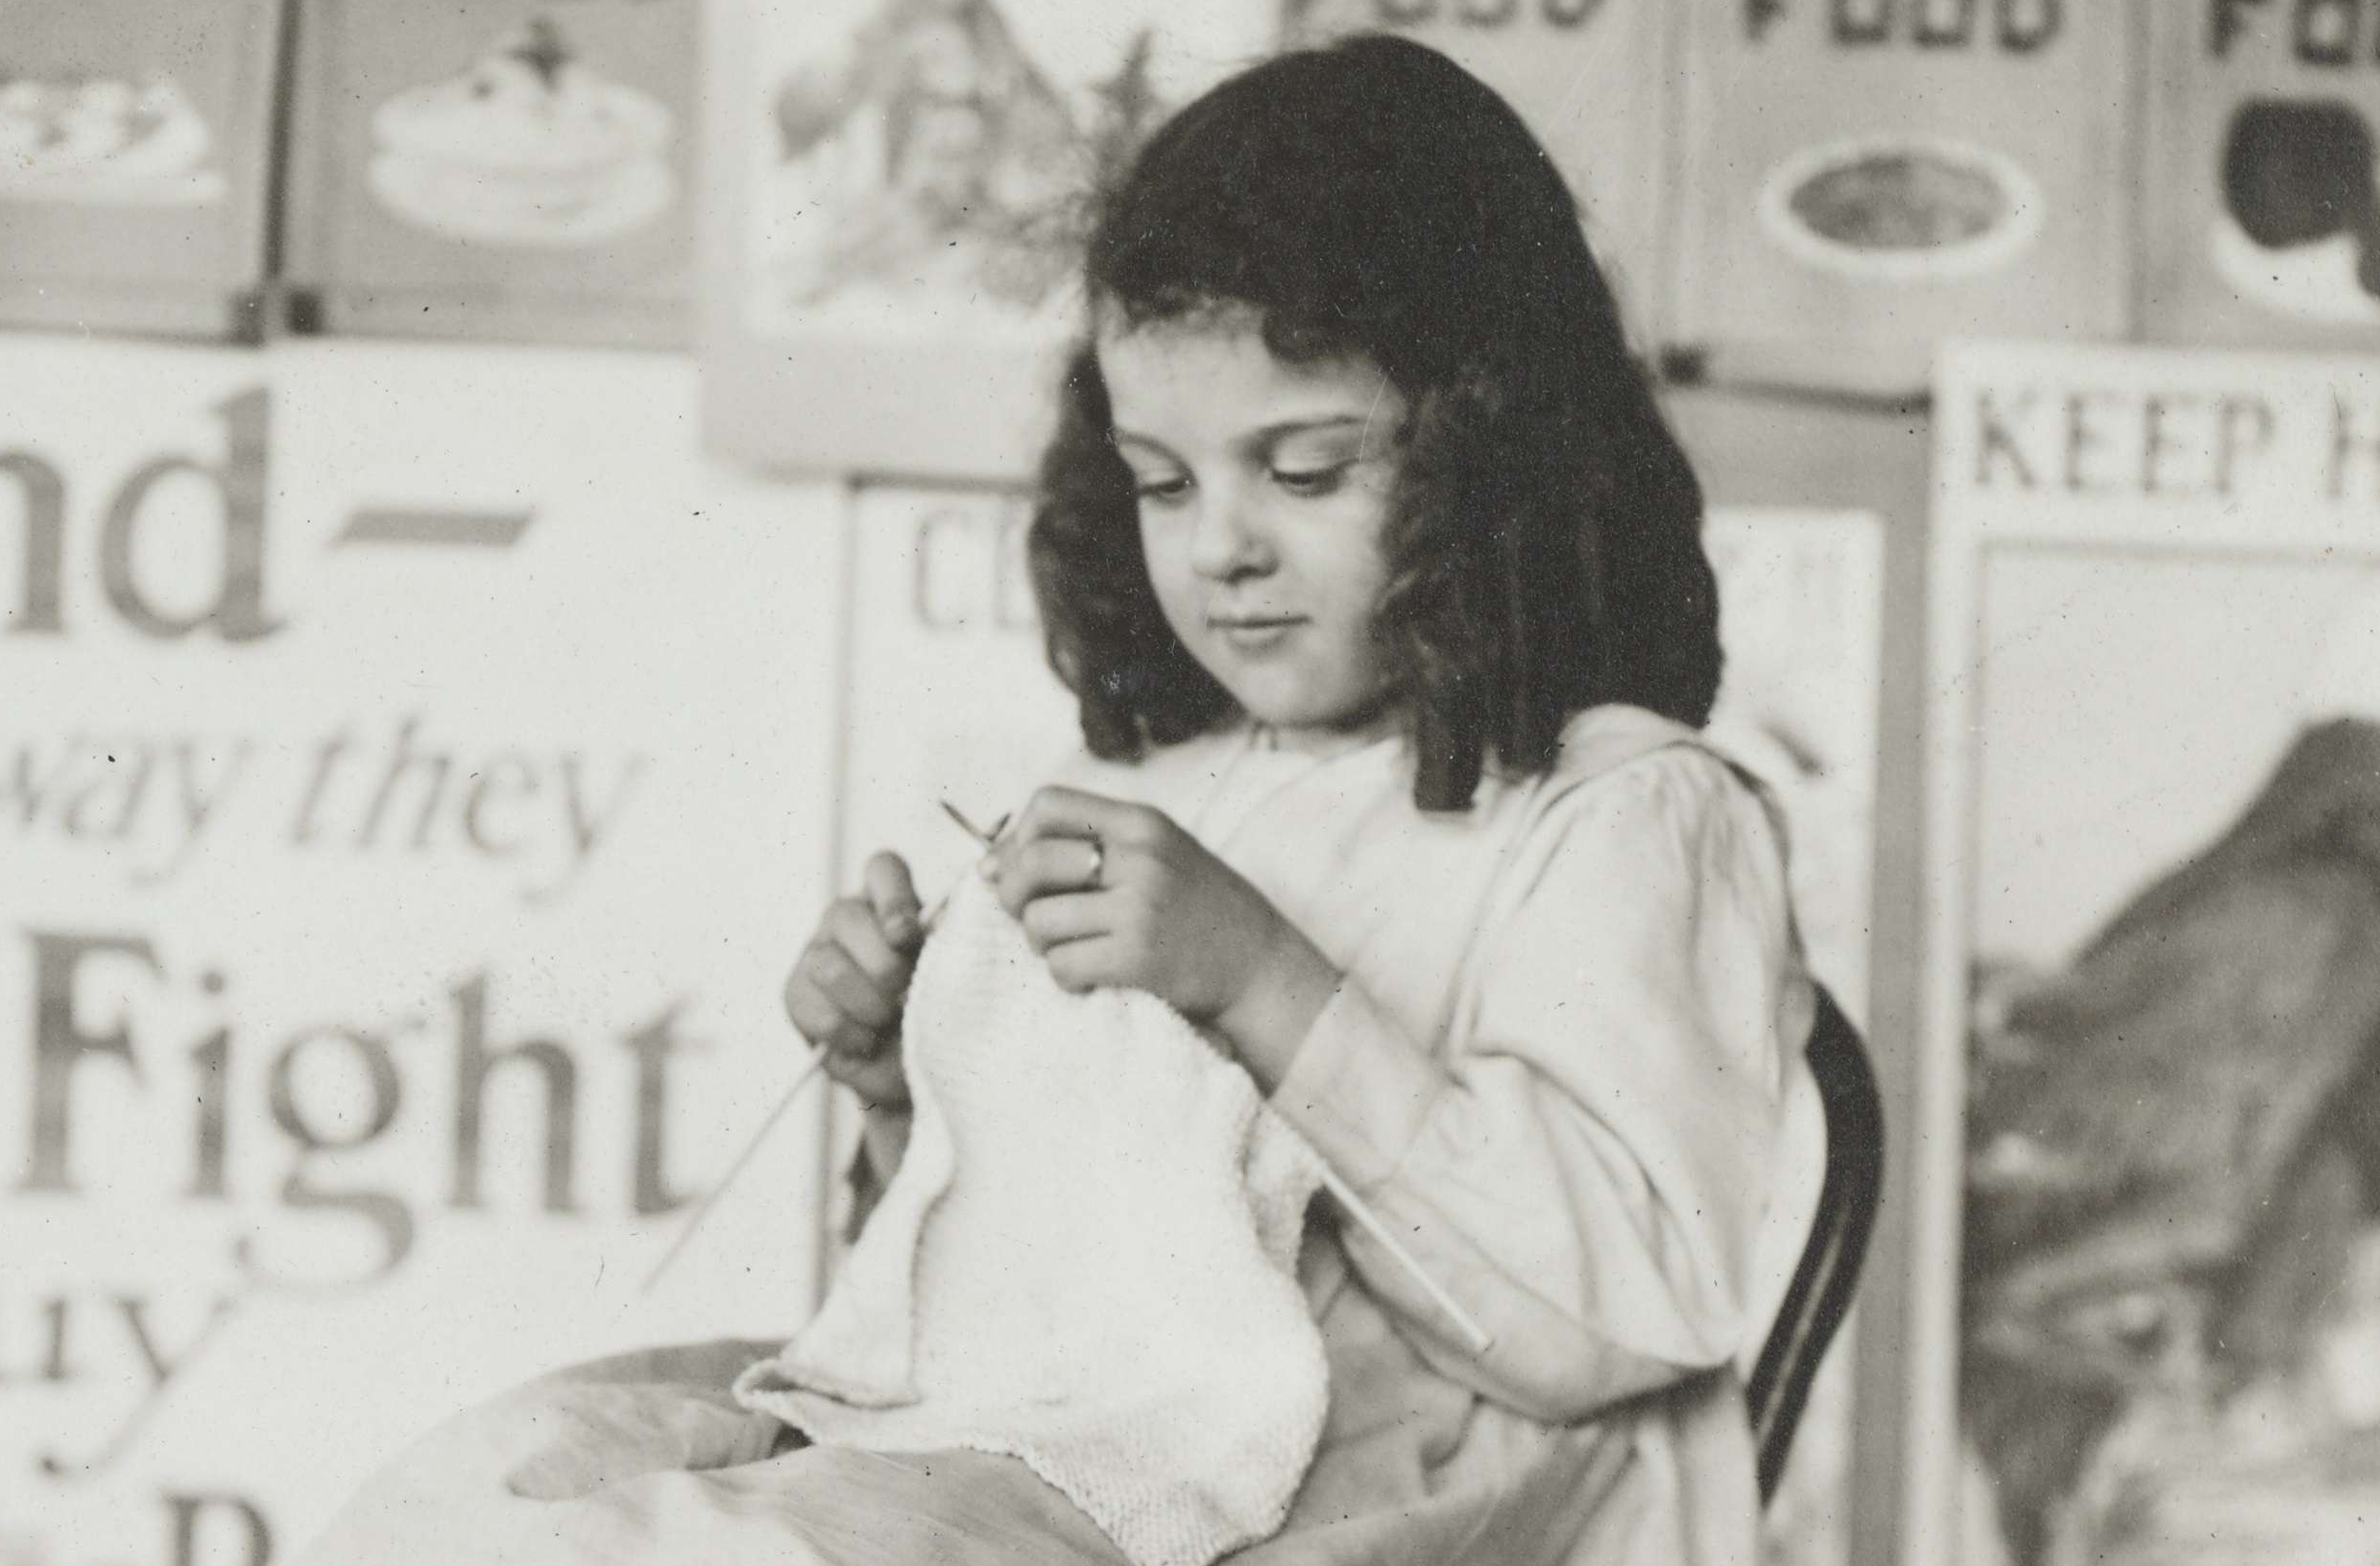 Children of the Irving-Jefferson School of Plainfield, New Jersey, Learning to Knit. Knitting in school room, 1st grade